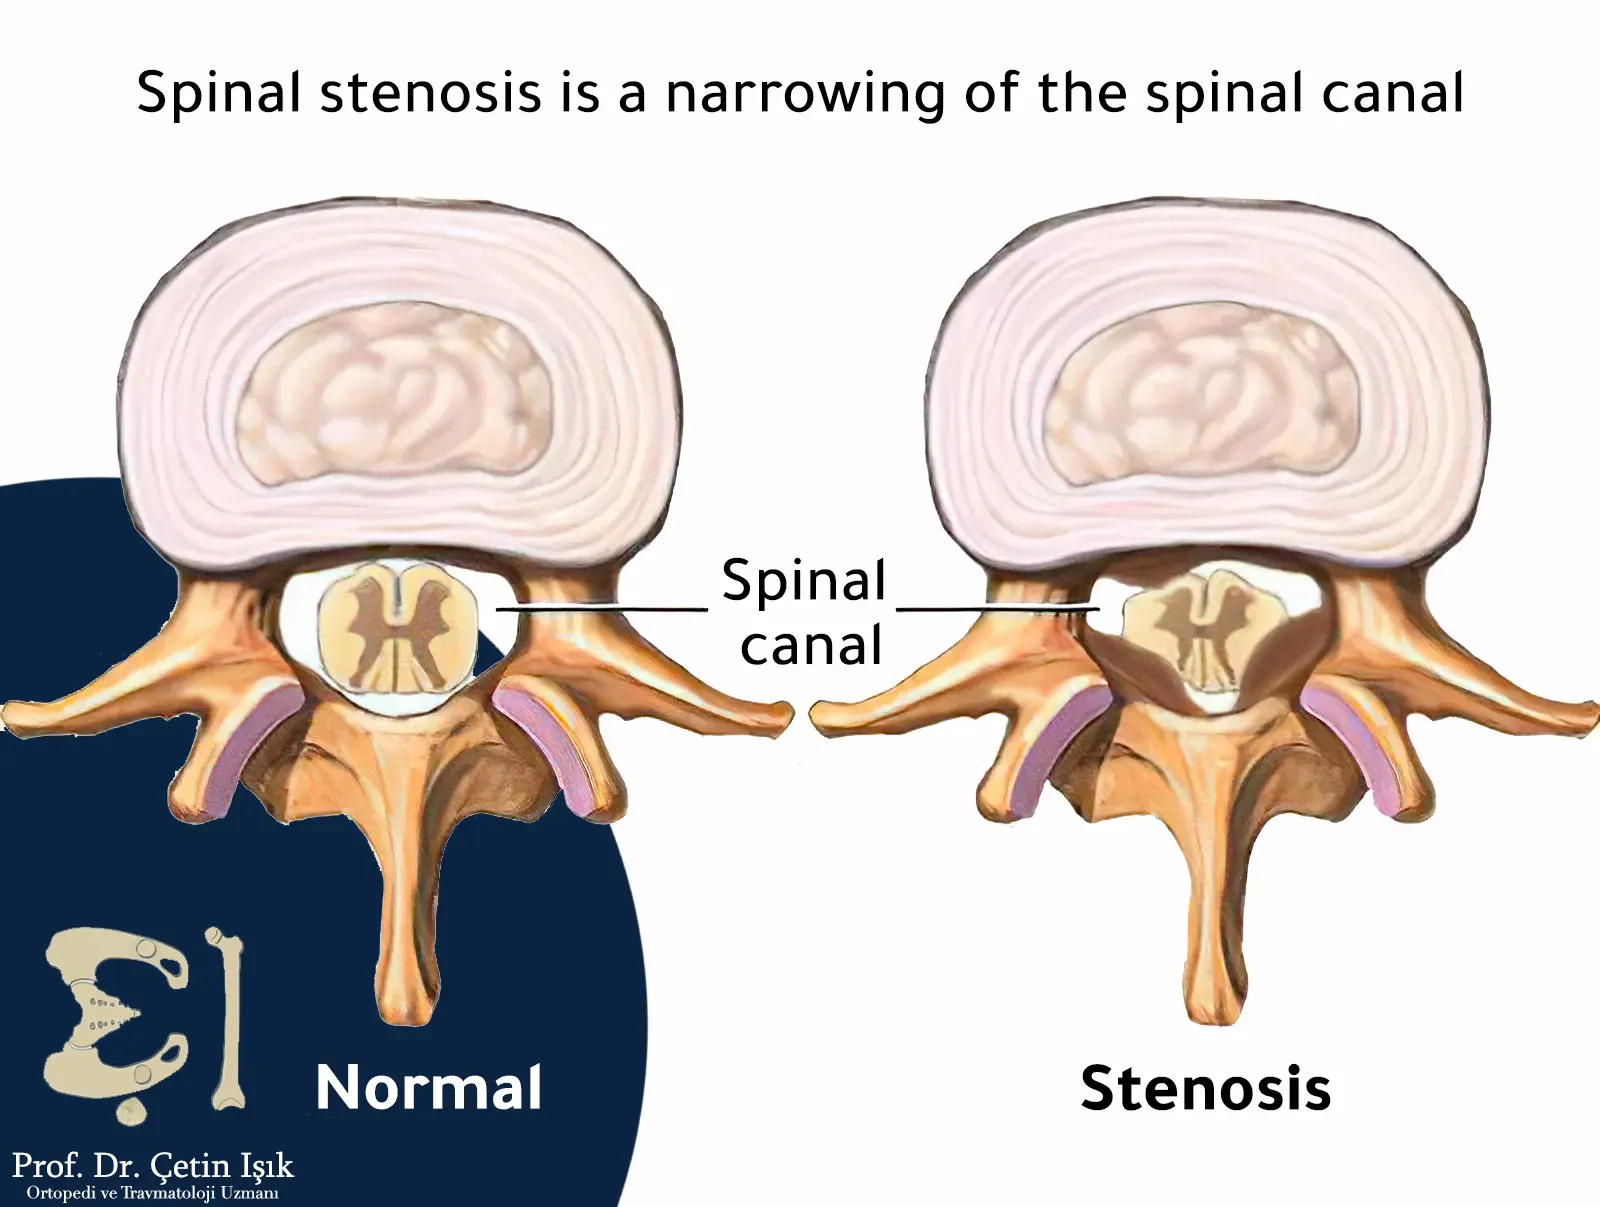 The difference between a normal vertebra and a narrowed vertebra in the spine